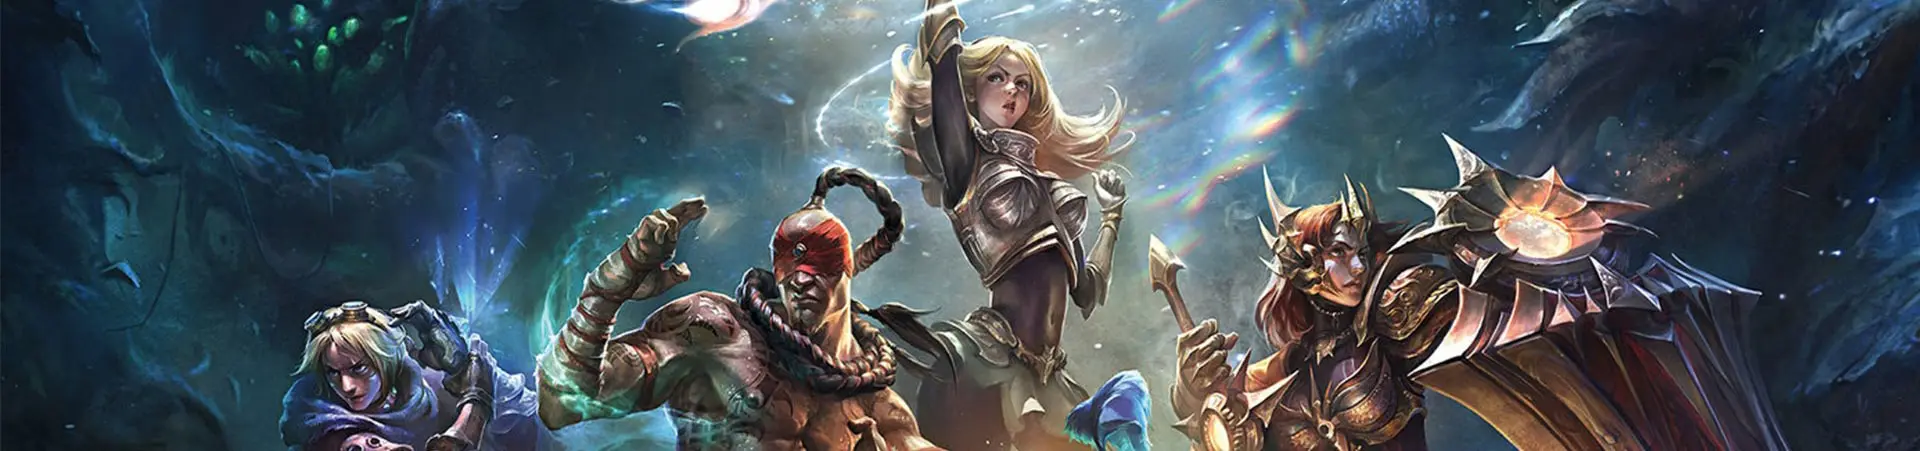 VIRTUOS STUDIO PARTNERS WITH RIOT GAMES TO DEVELOP LEAGUE OF LEGENDS SKINS